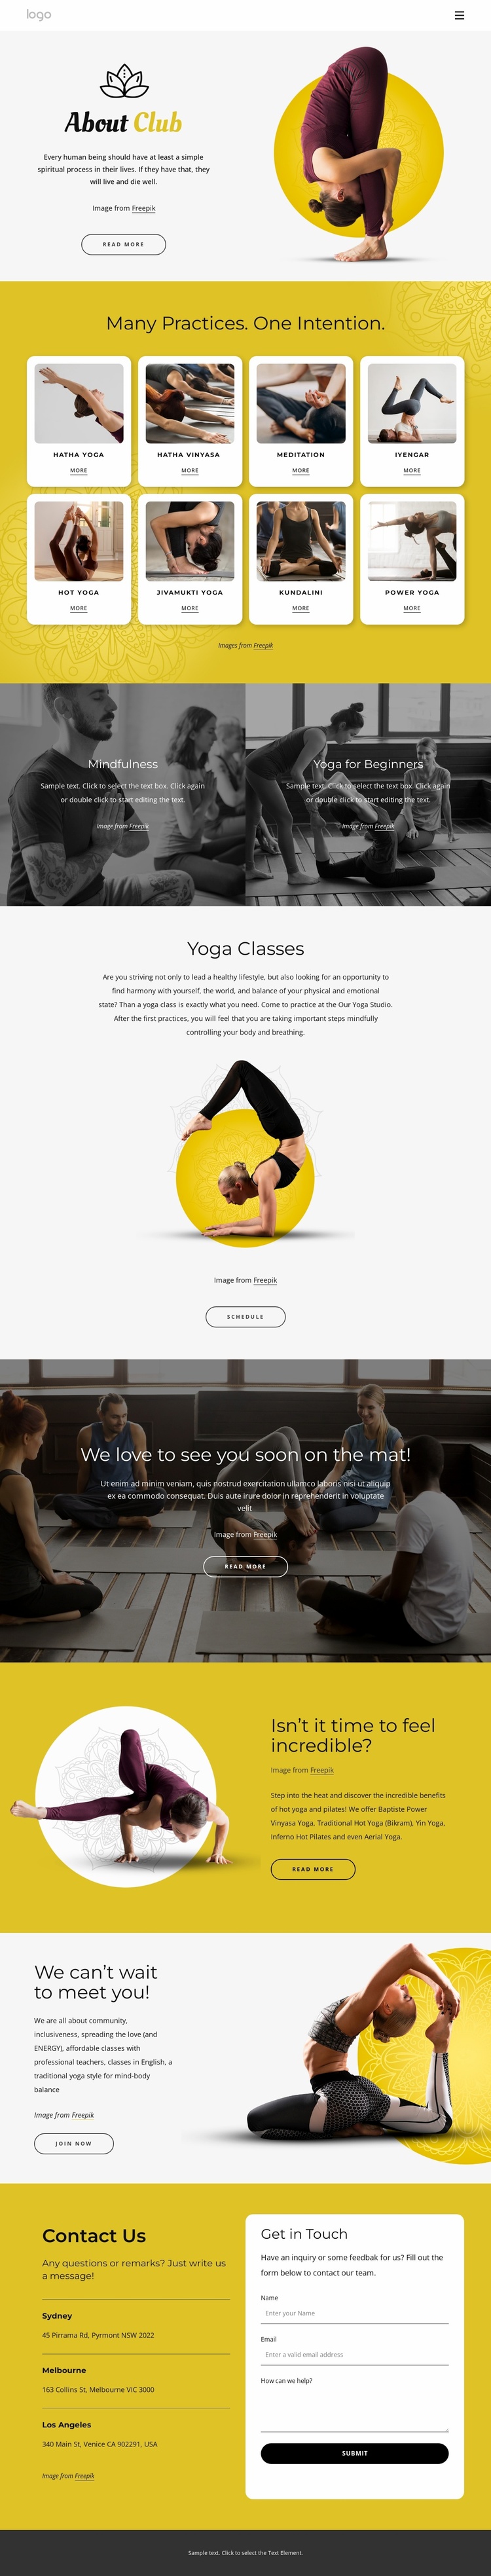 Physical, ethical and spiritual practice eCommerce Template